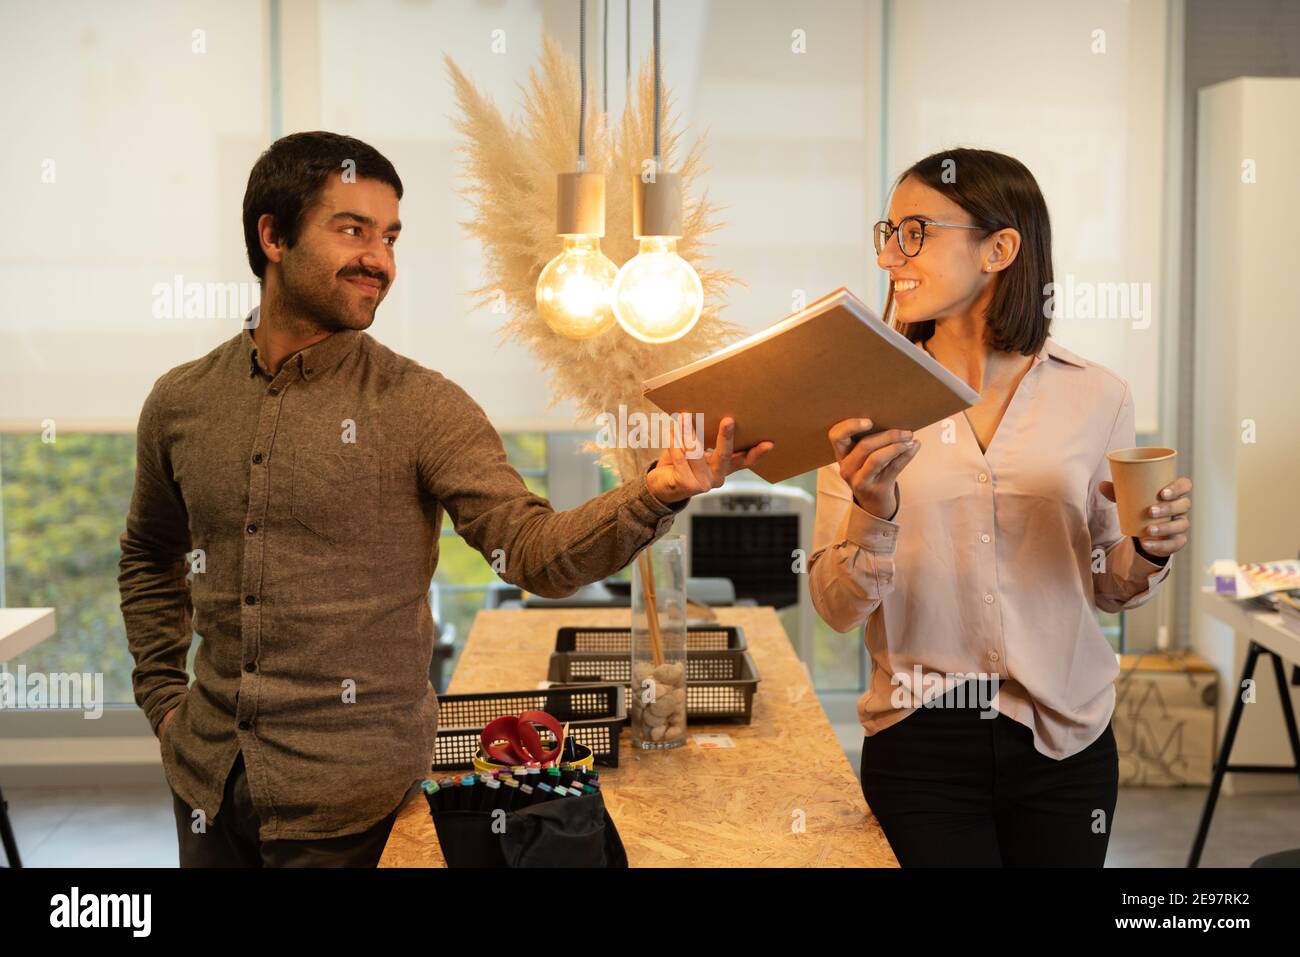 Happy hispanic man giving a folder to his female smiling coworker while looking each other. Good working environment concept. Stock Photo